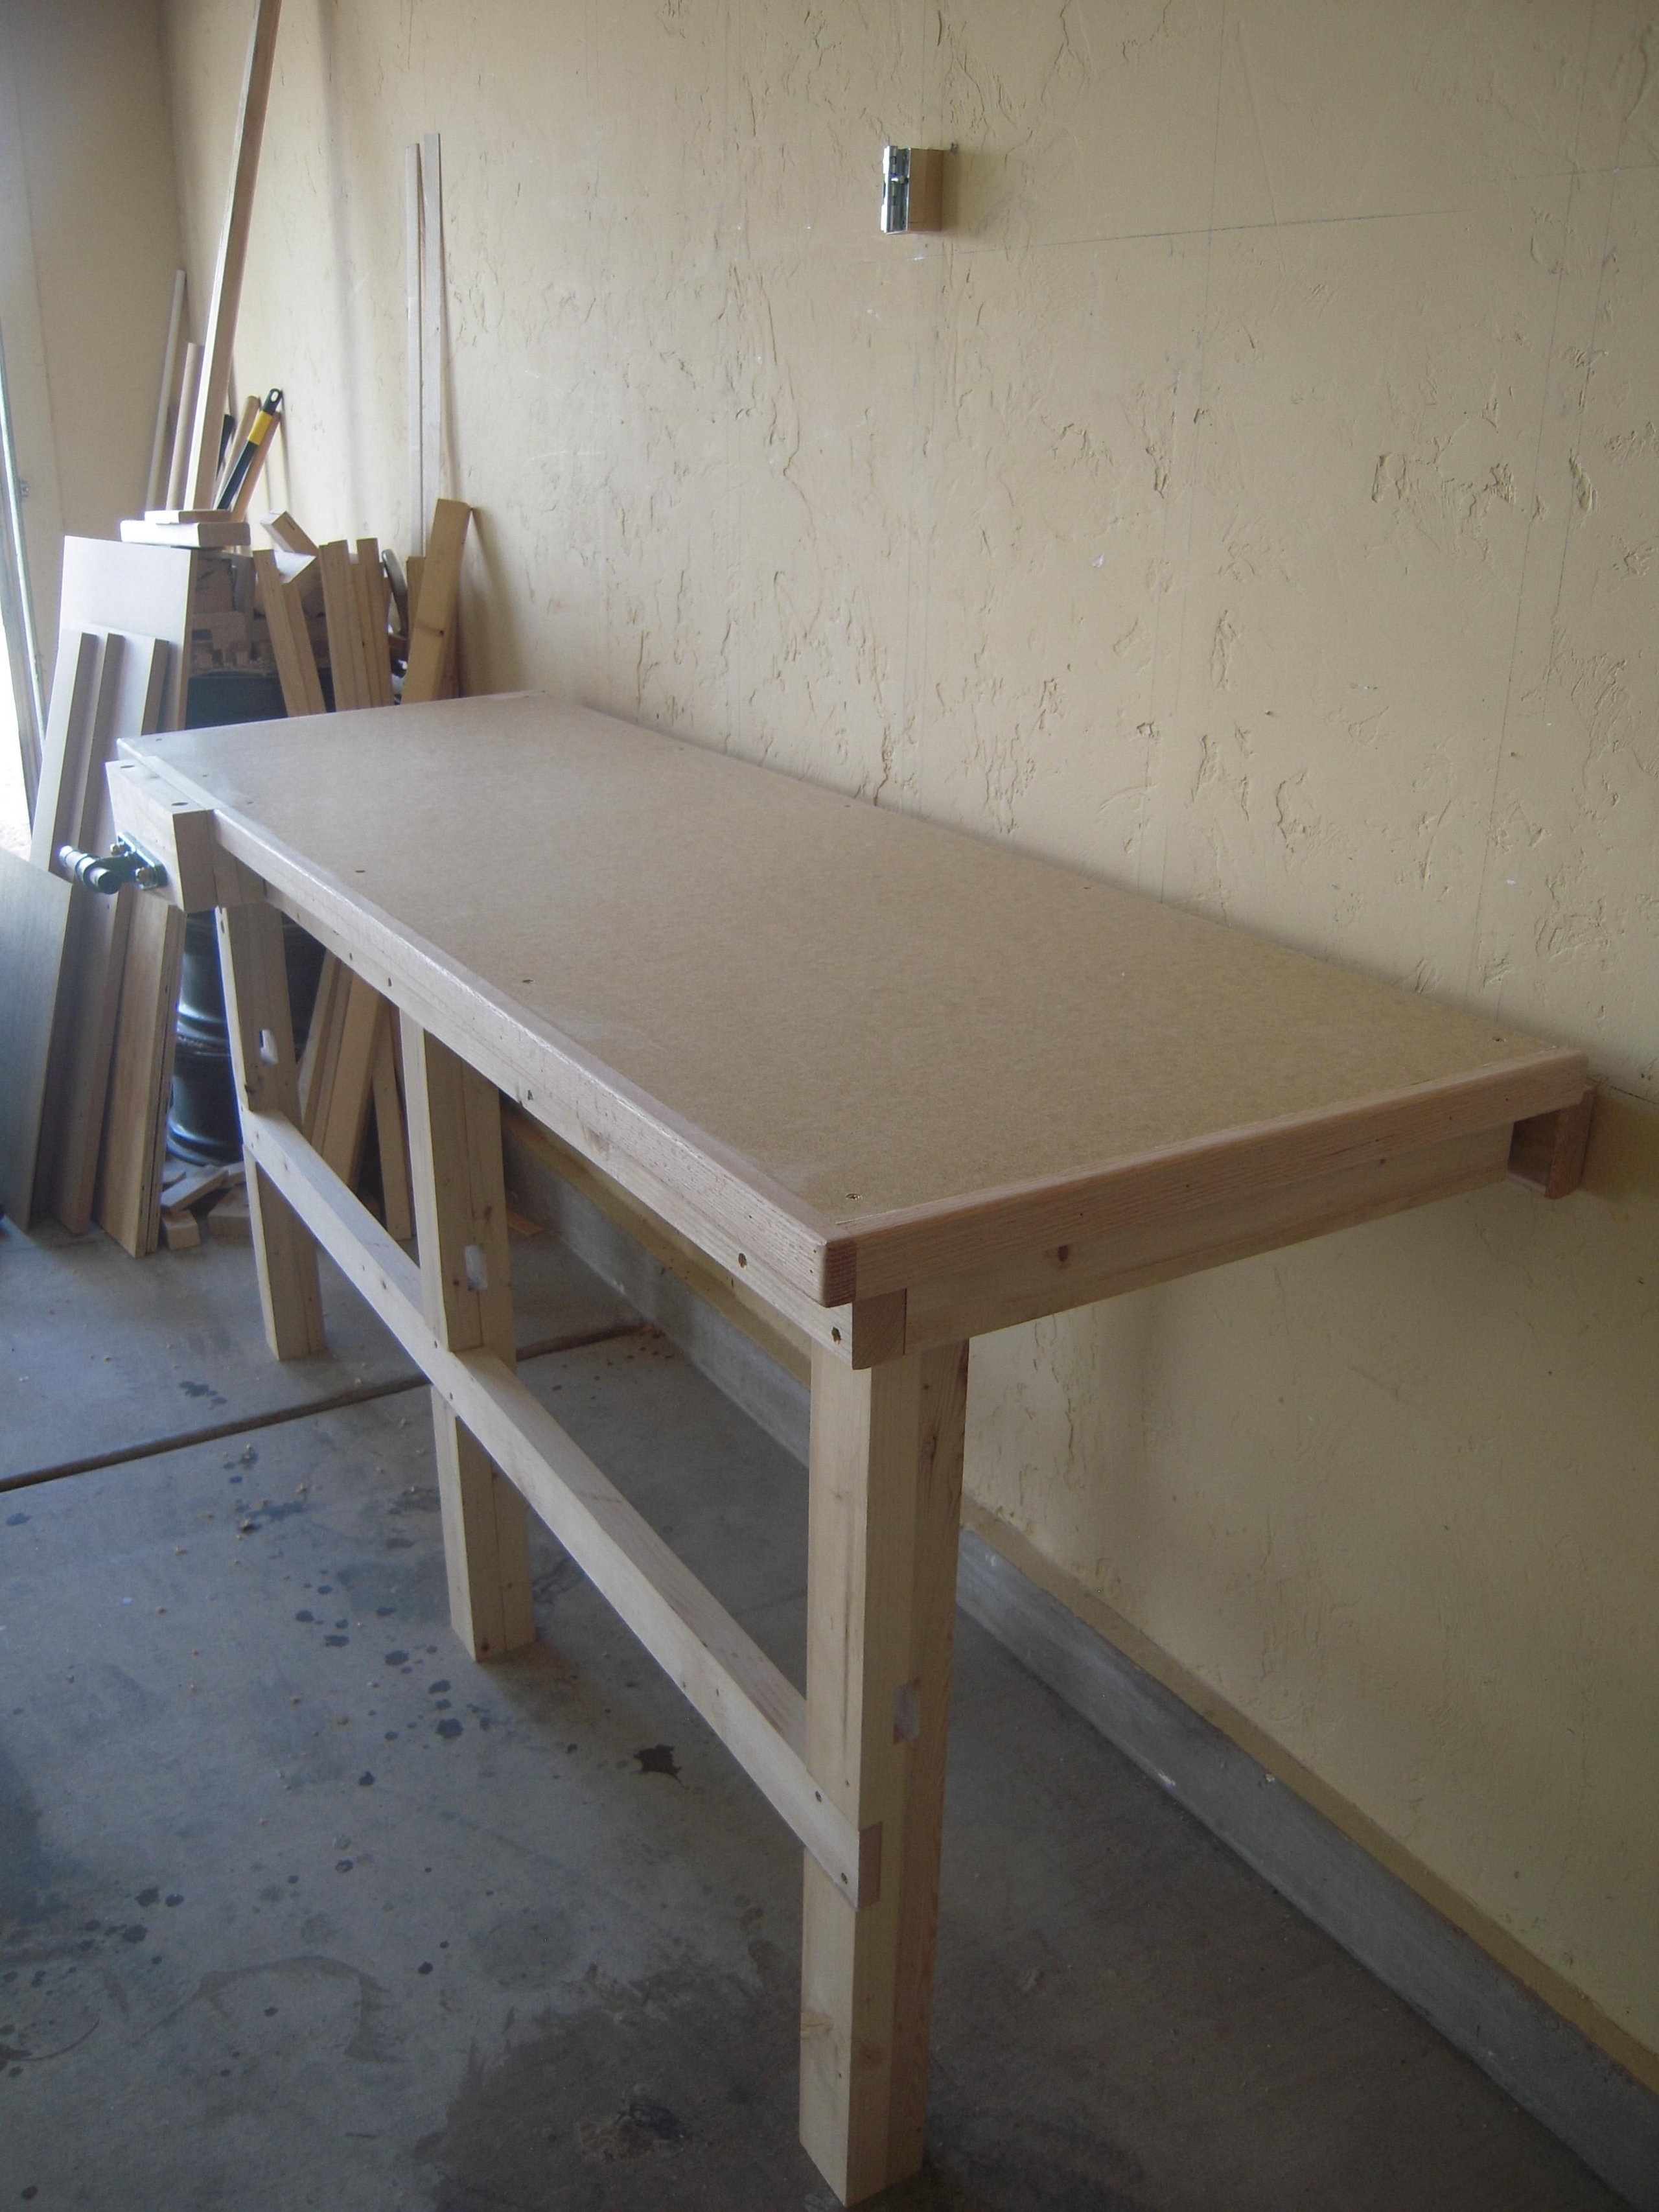 Wall mount work bench